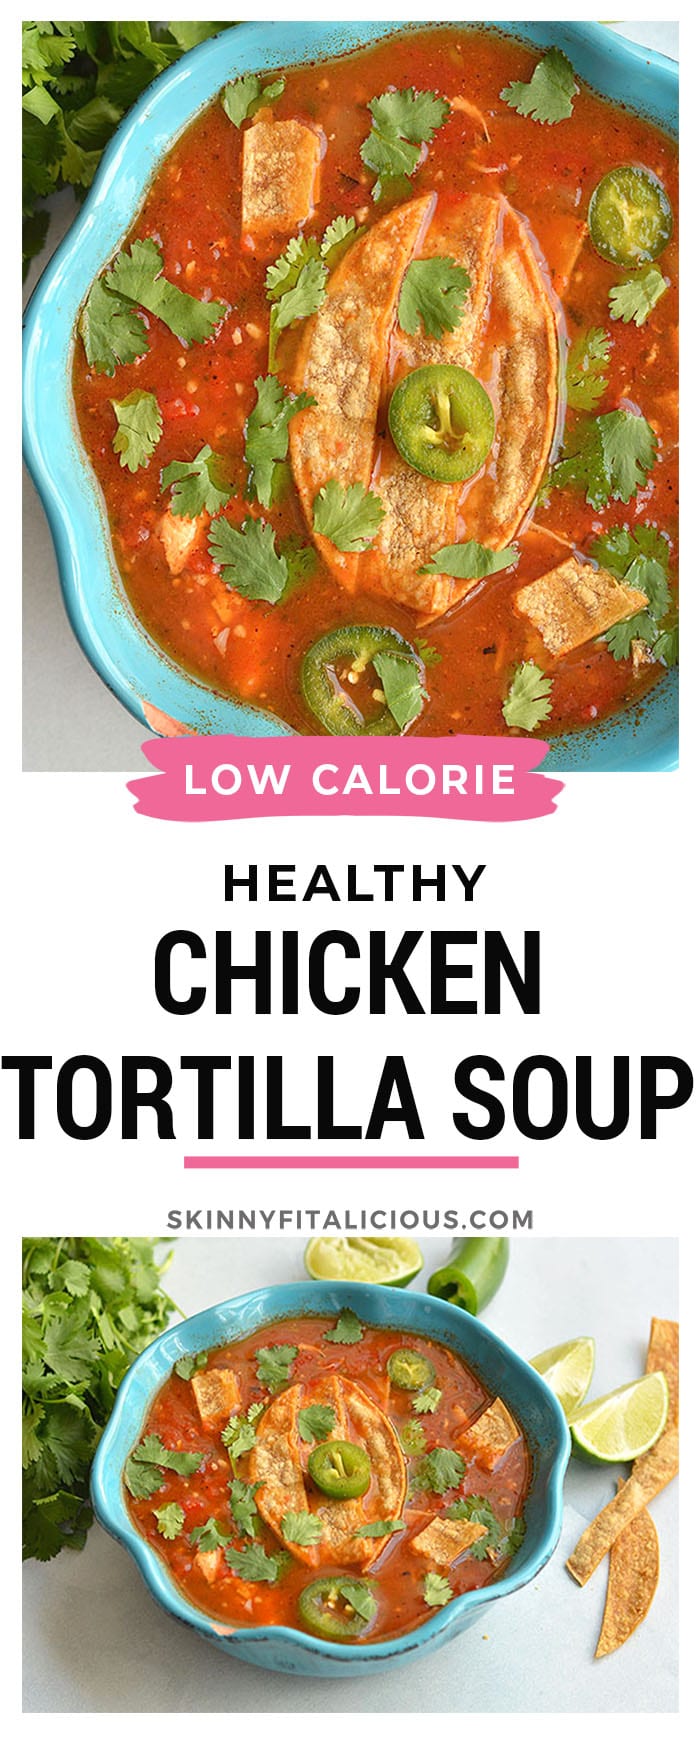 Chicken Tortilla Soup! A gluten free and Paleo soup that's nourishing and slightly spicy! Roasted then blended pasilla chilies and carrots give this soup amazing flavors.